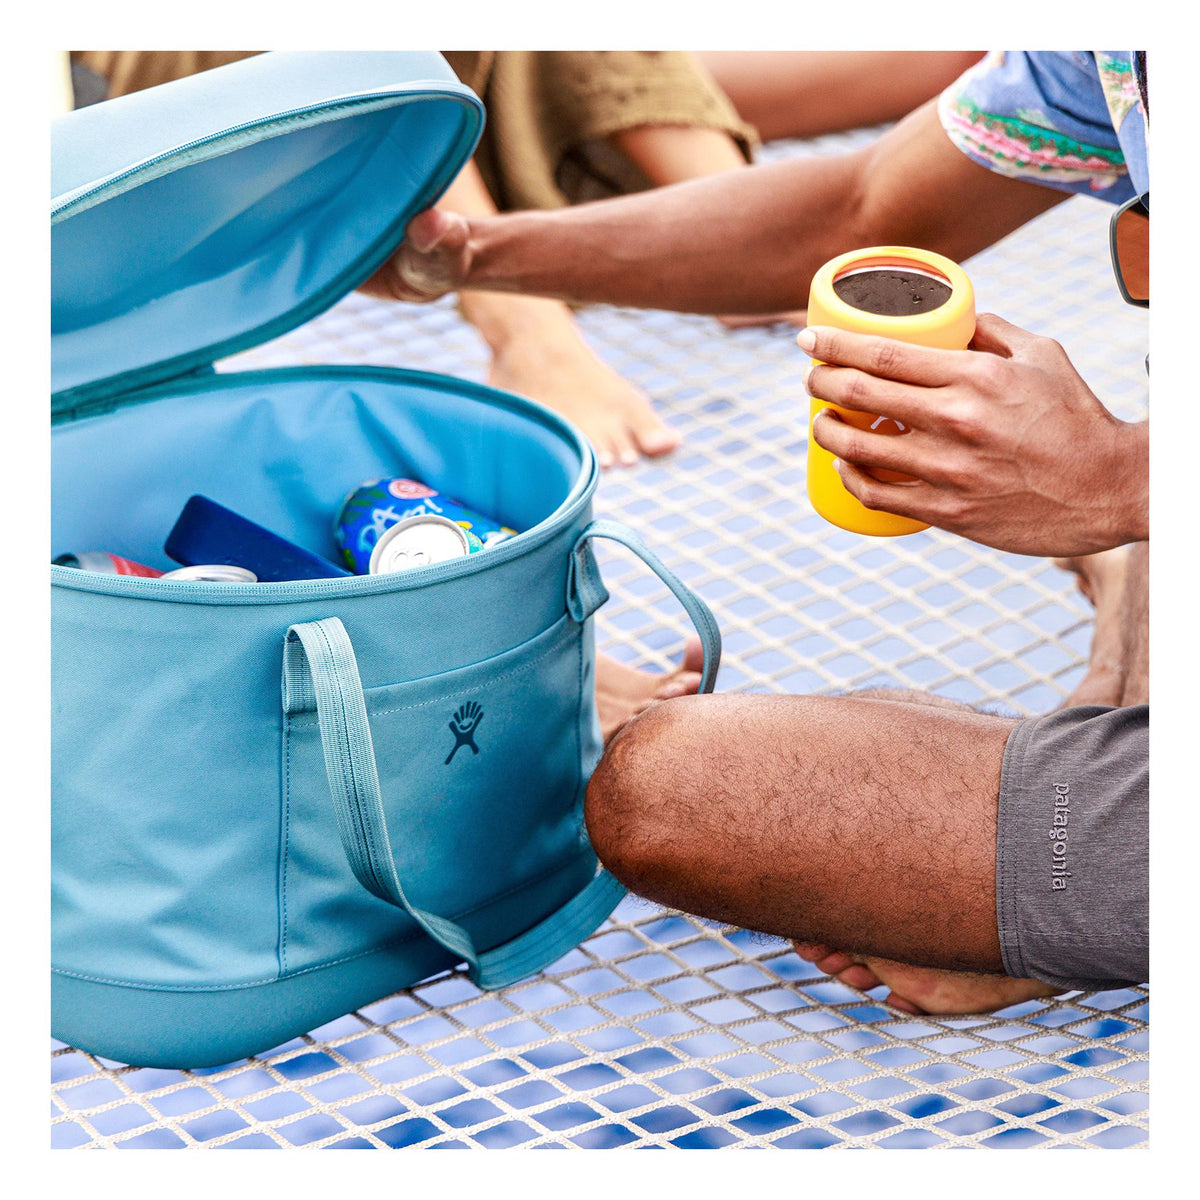 Hydro Flask Carry Out Soft Cooler 12L